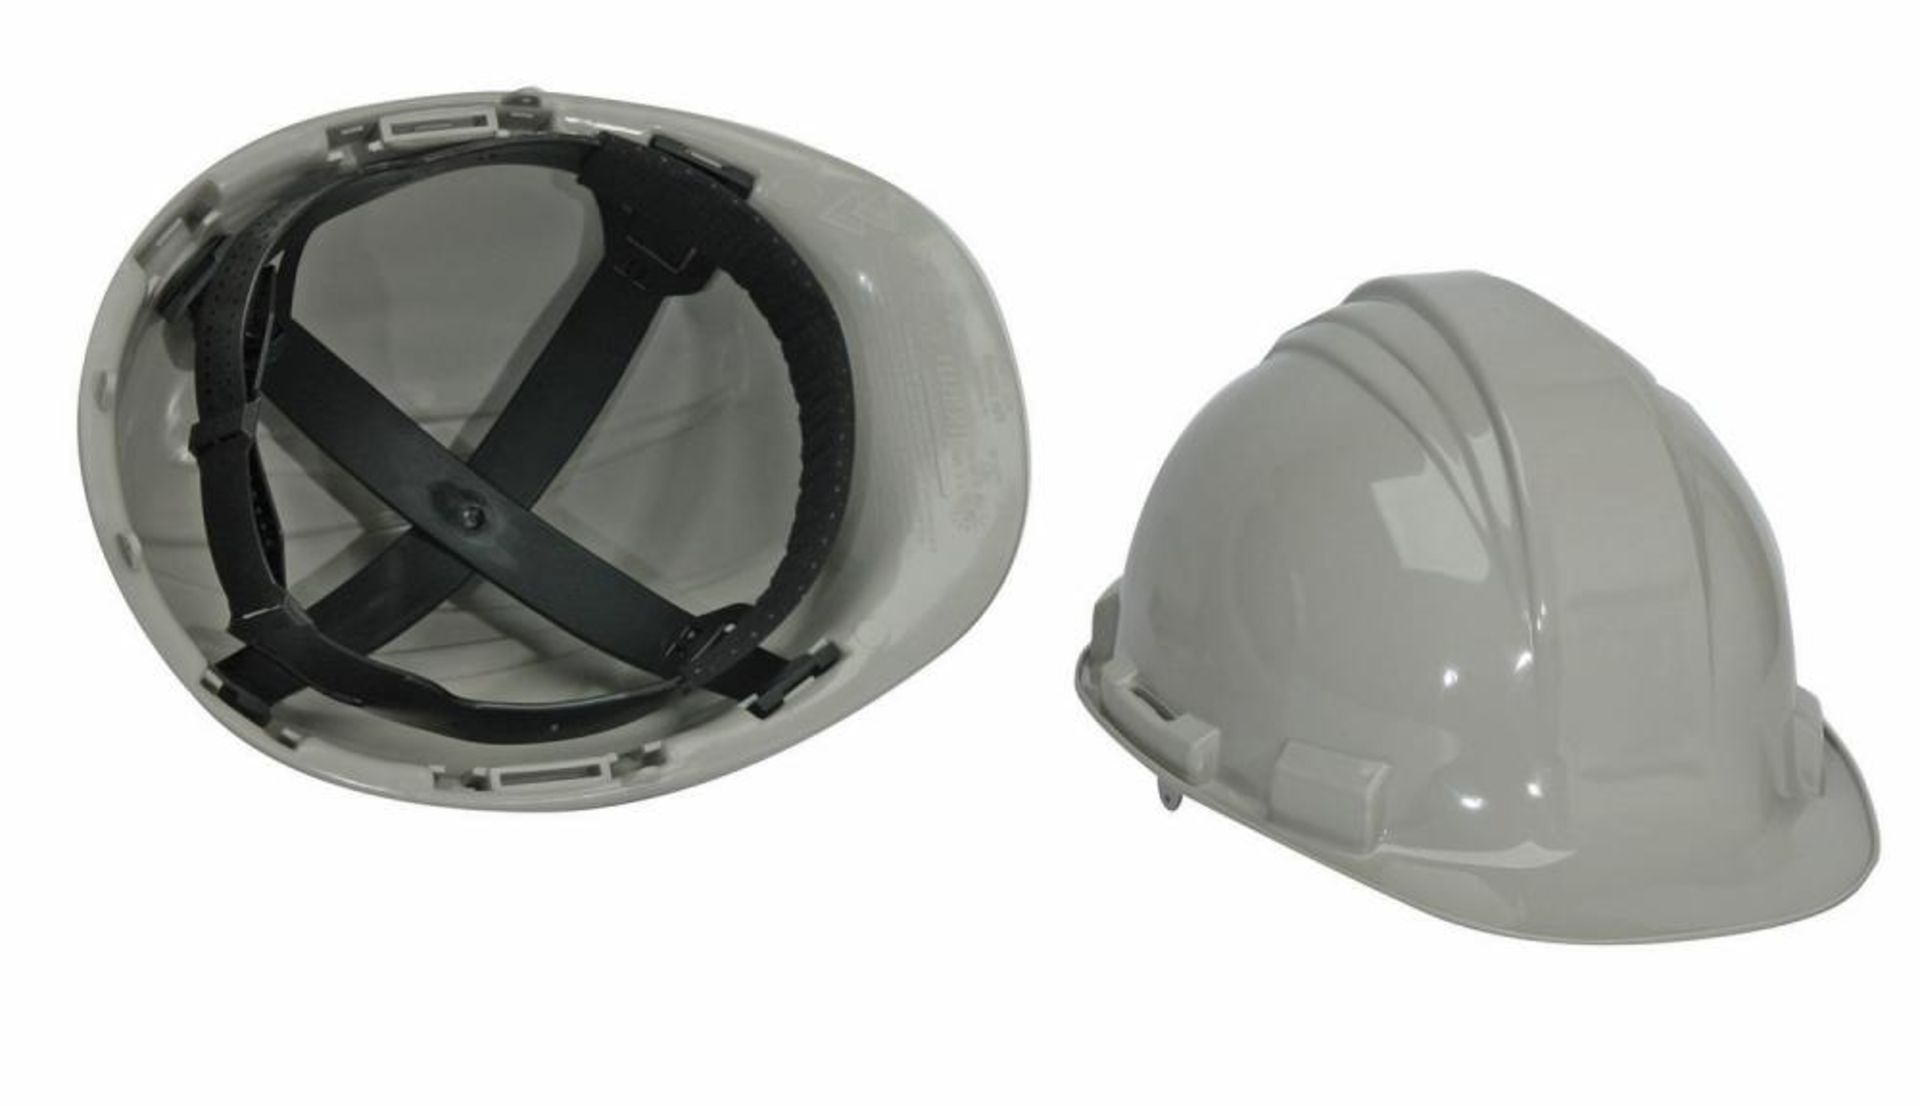 5 x North A59 Safety Helmet Grey - CL185 - Ref: NO/A59/GREY/P14 - New Stock - Location: Stoke-on-Tre